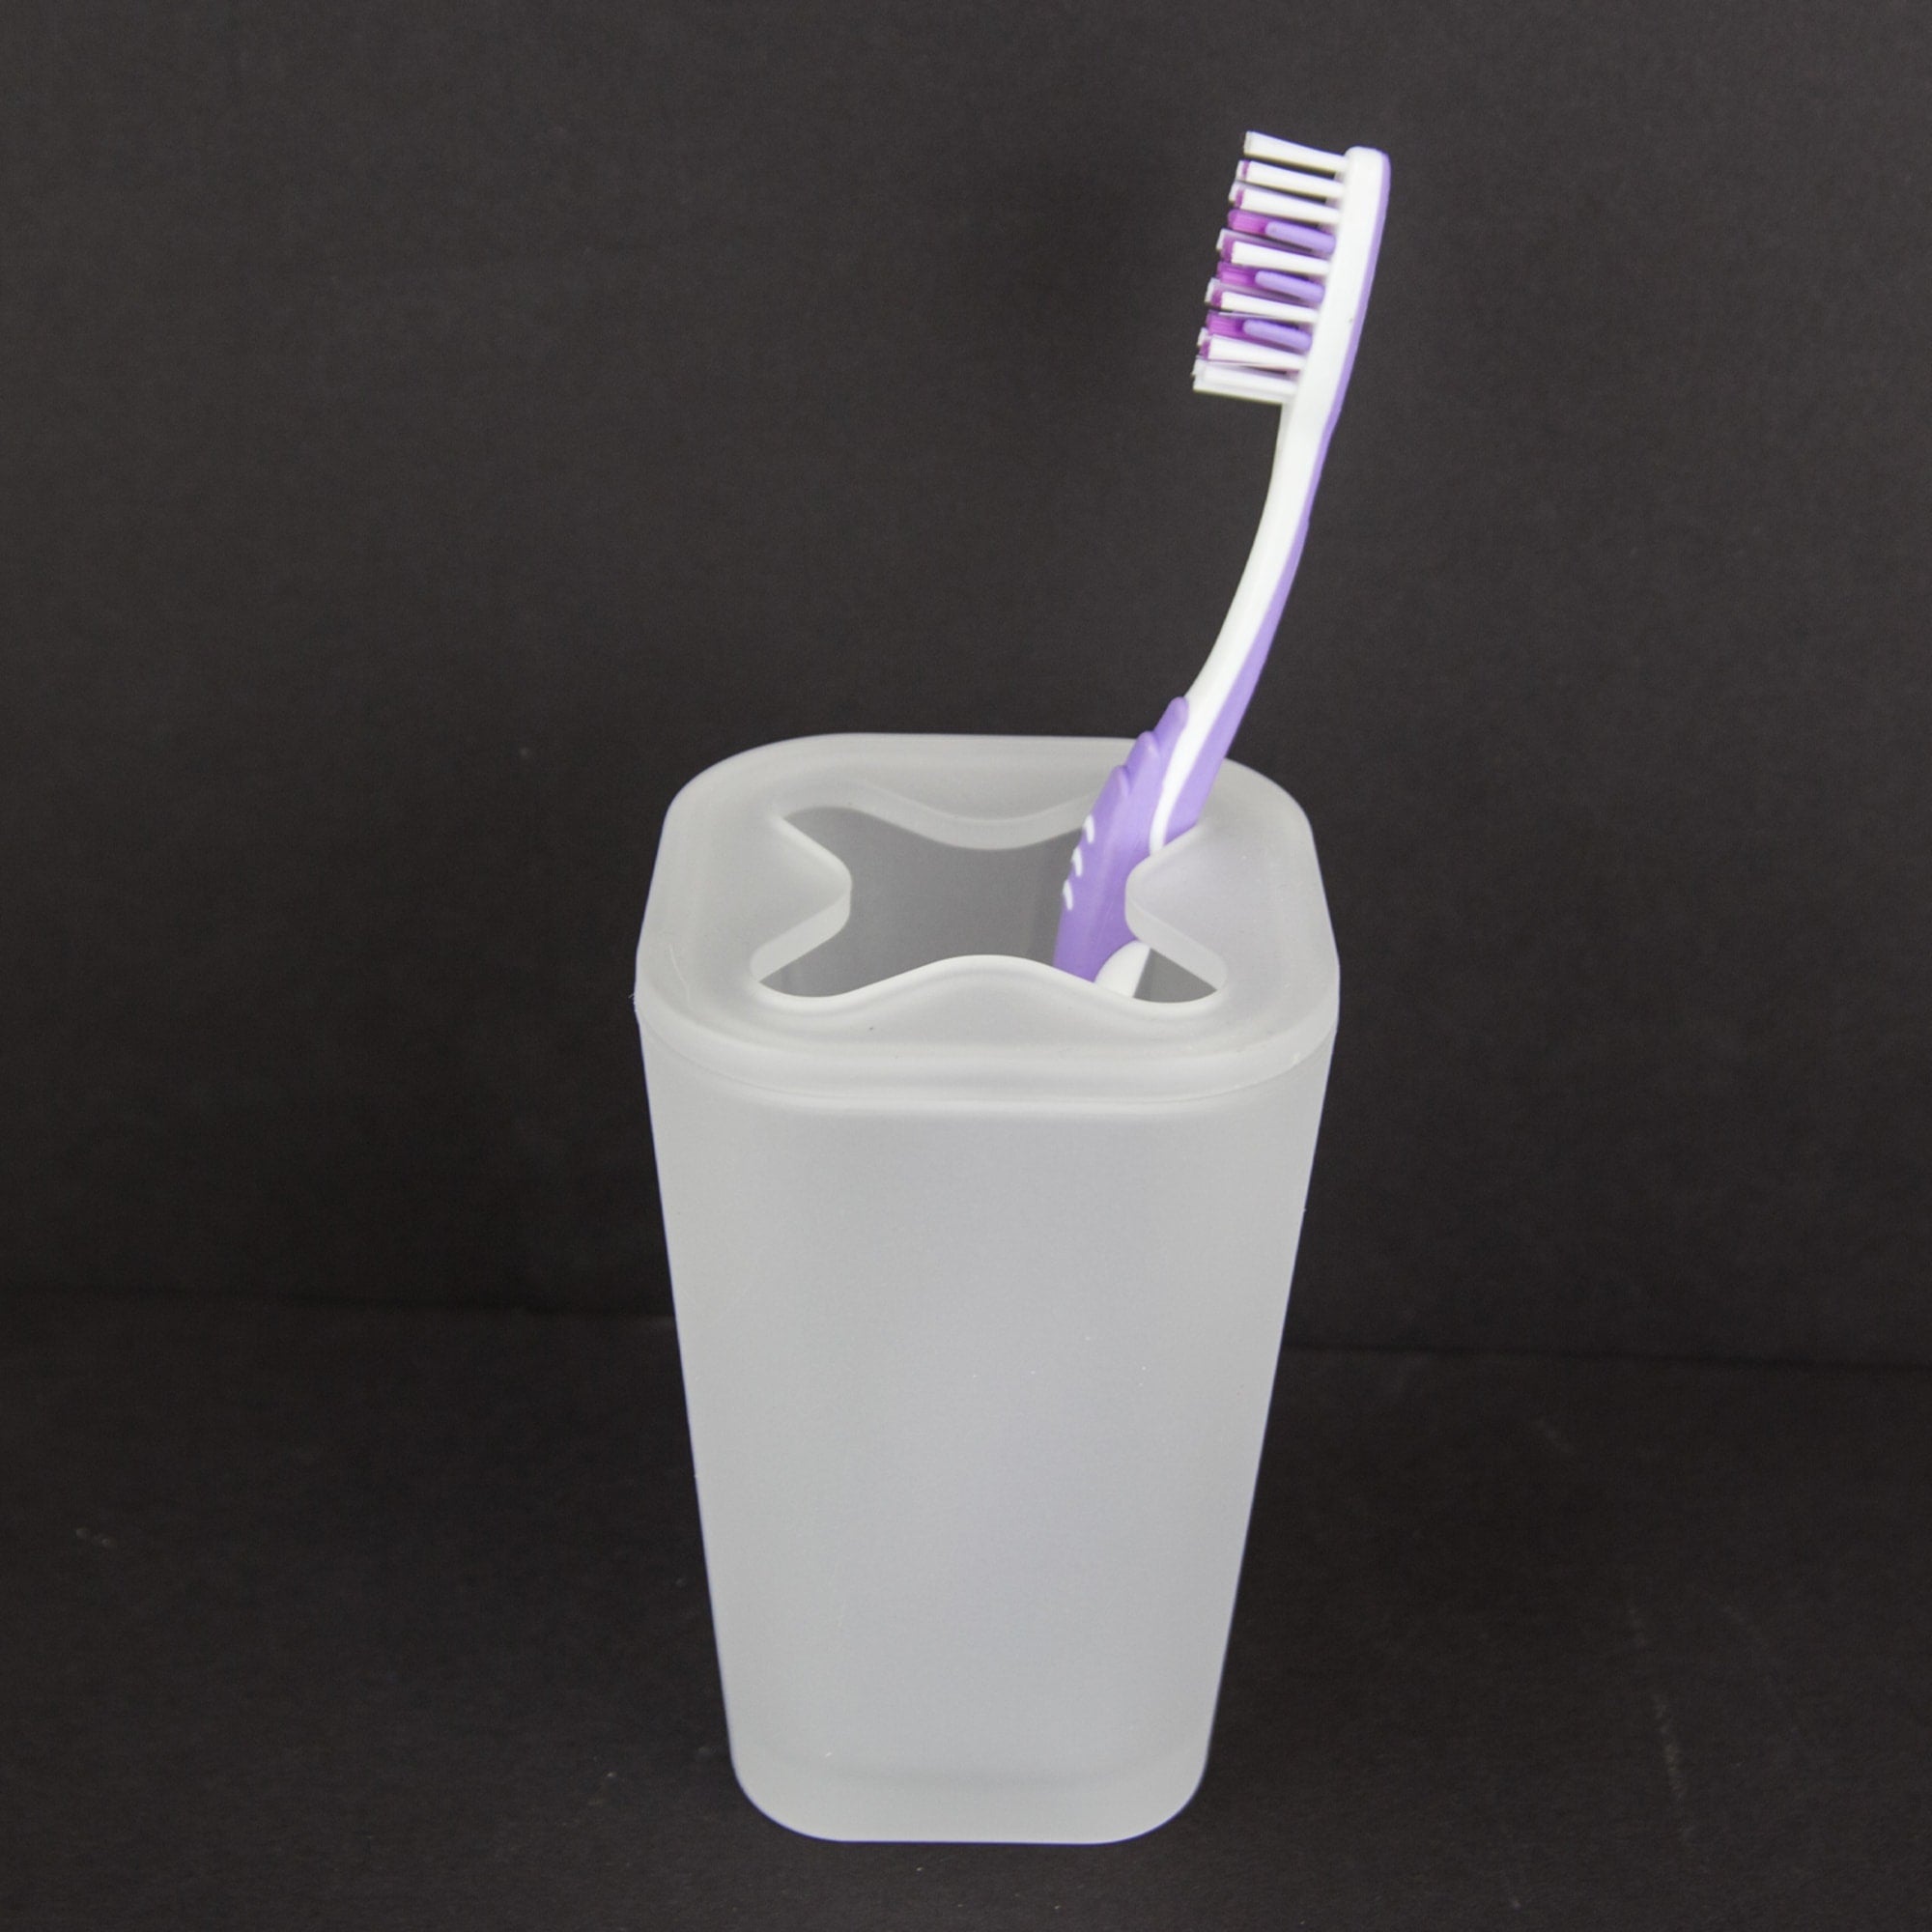 Home Basics Frosted Rubberized Plastic Toothbrush Holder $2.50 EACH, CASE PACK OF 12